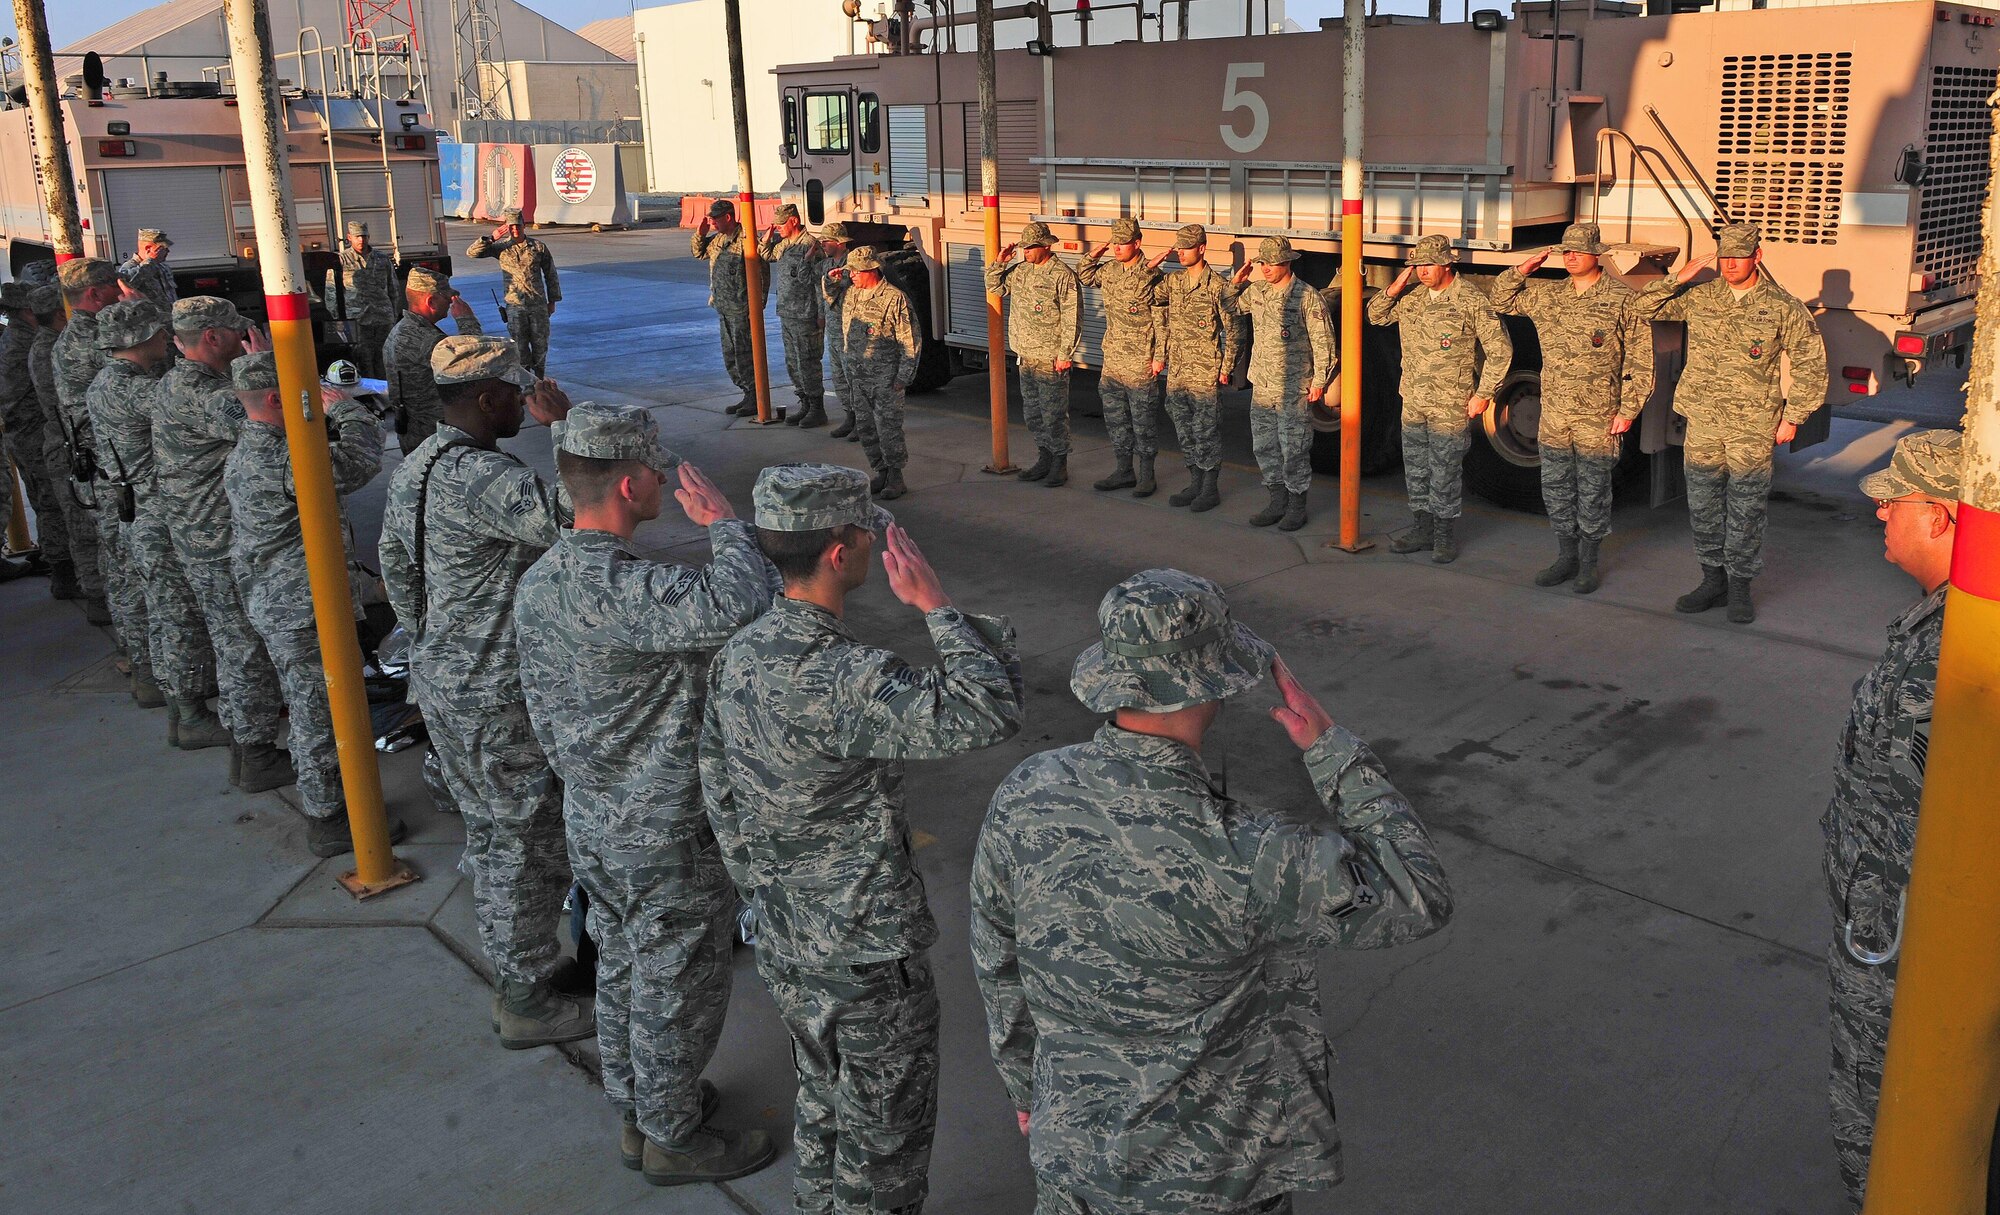 Firefighters from the 380th Expeditionary Civil Engineer Squadron Fire Department render a salute during a Firefighter Last Call Ceremony for departed, former Air Force Fire Chief Donald Warner at an undisclosed location in Southwest Asia, Dec. 30, 2015. Among Warner’s contributions to Air Force firefighting include coining the Air Force fire protection motto “The Desire to Serve, the ability to Perform, and the Courage to Act,” and successful pushing to have fallen DOD firefighter’s names added to the National Fallen Firefighters Memorial in Emmetsburg, MD. (U.S. Air Force photo by Staff Sgt. Kentavist P. Brackin/released)